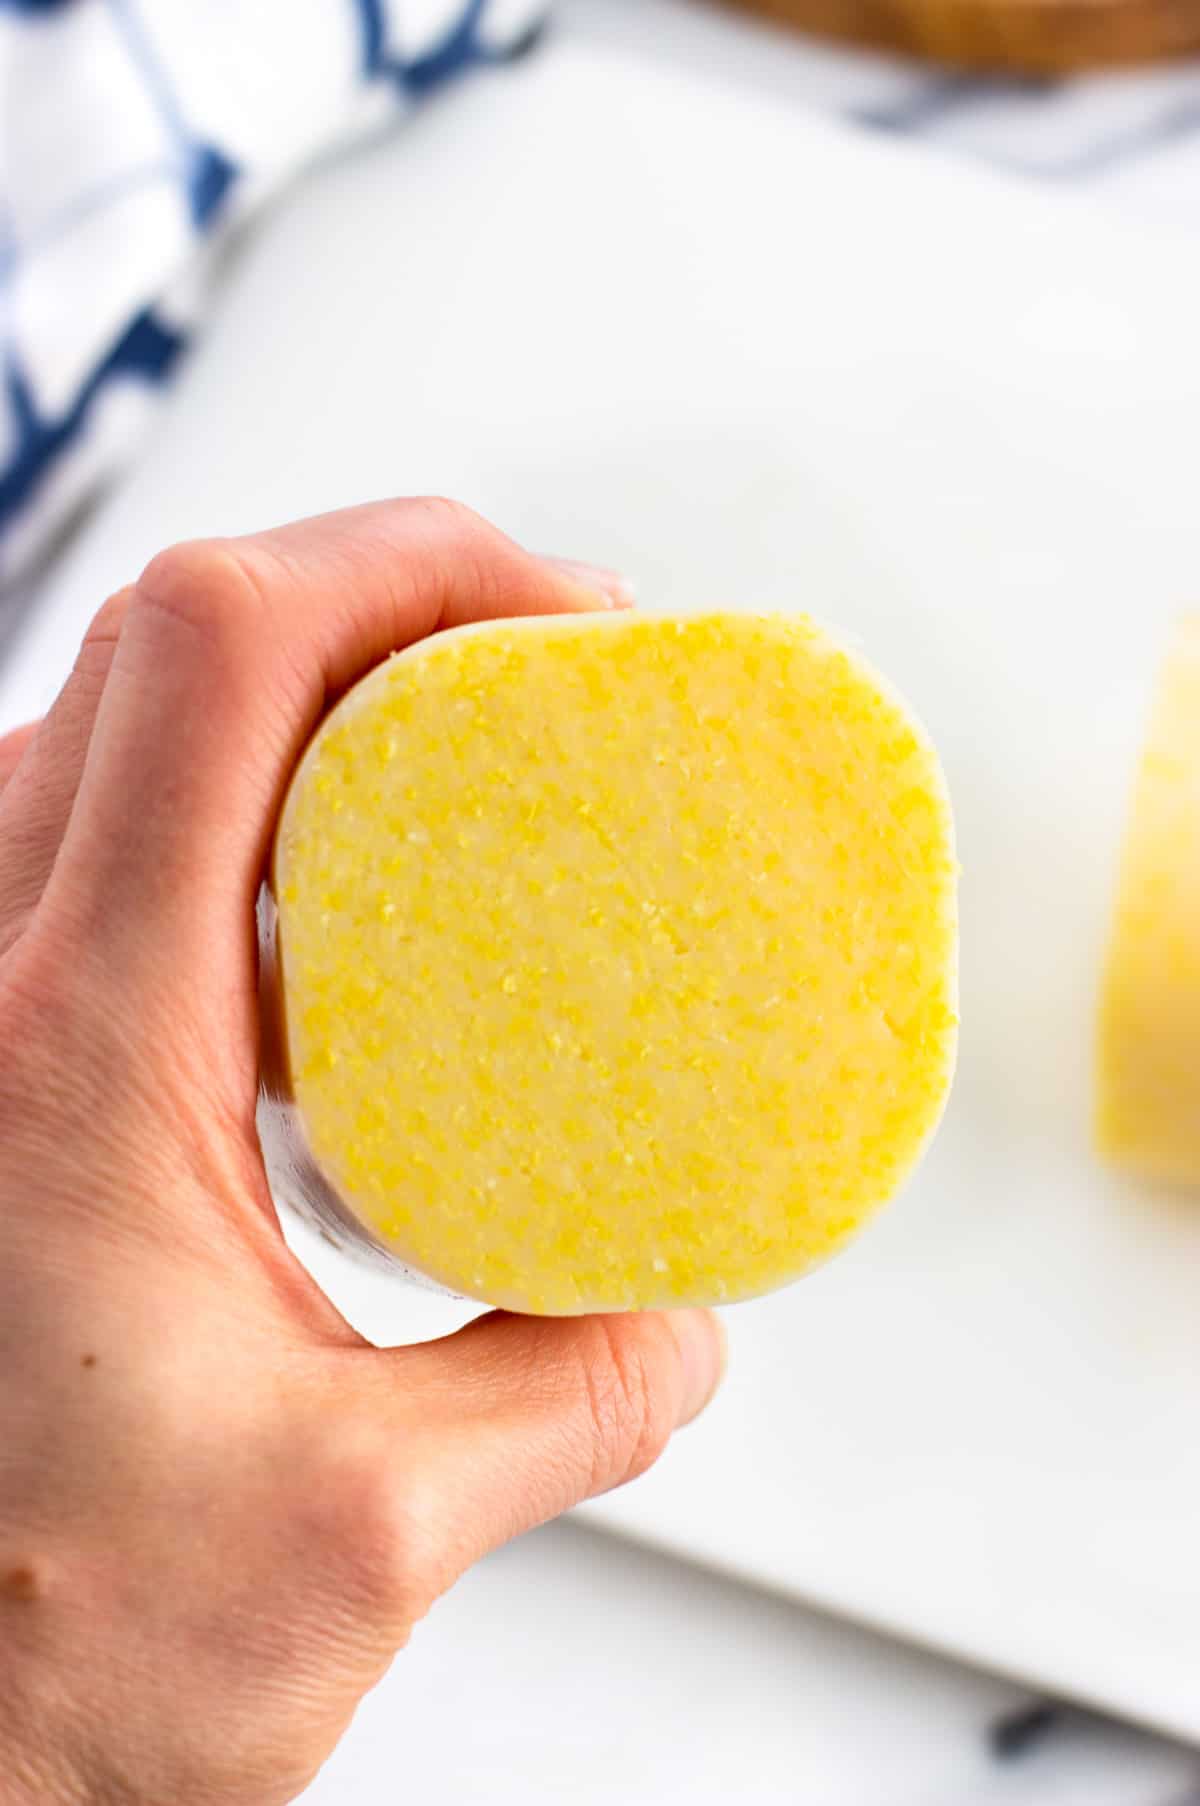 A hand holding up a sliced tube of polenta to show the inner texture.